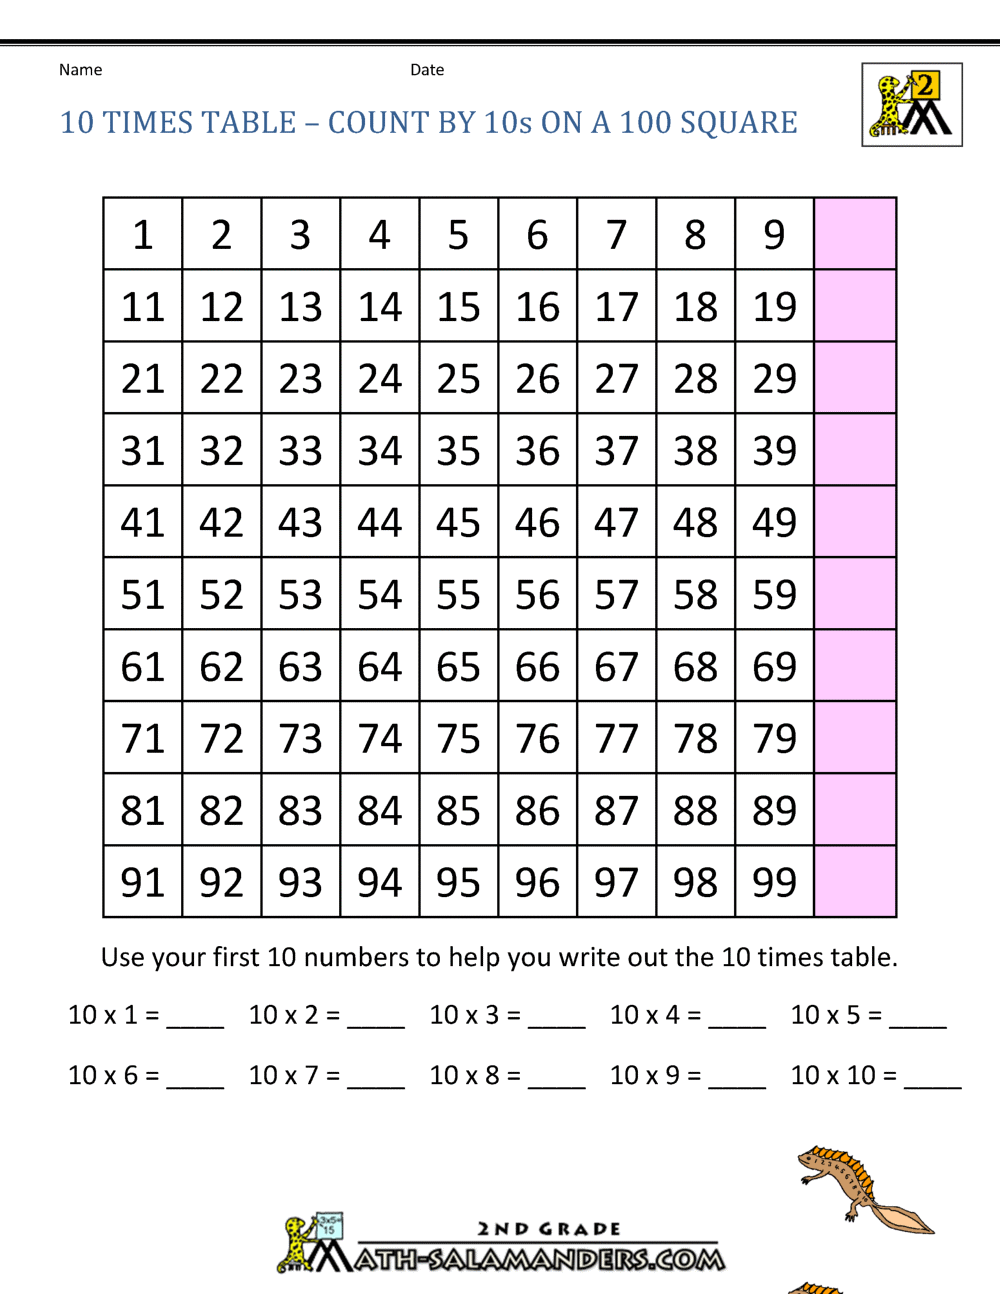 10-times-table